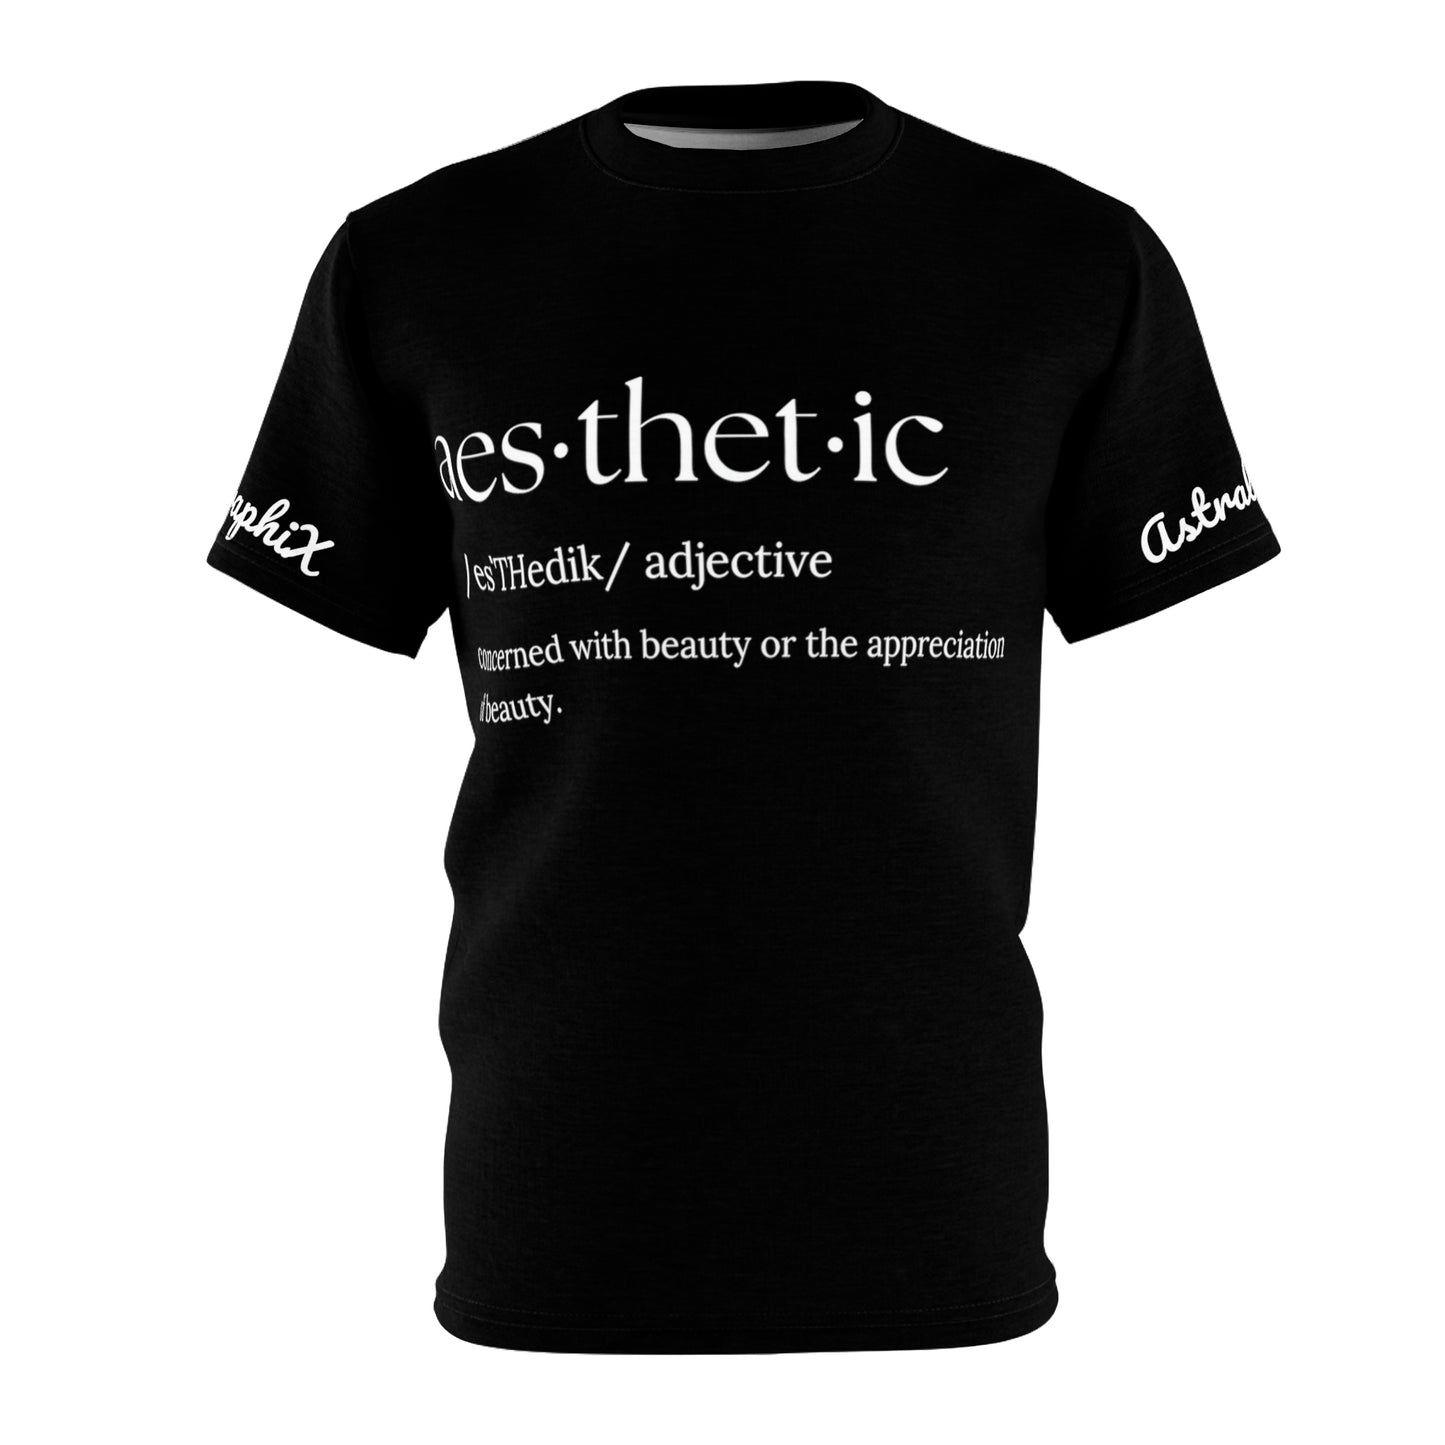 Word Art Collection - Unisex AOP Cut & Sew Tee - Aes-thet-ic in Black